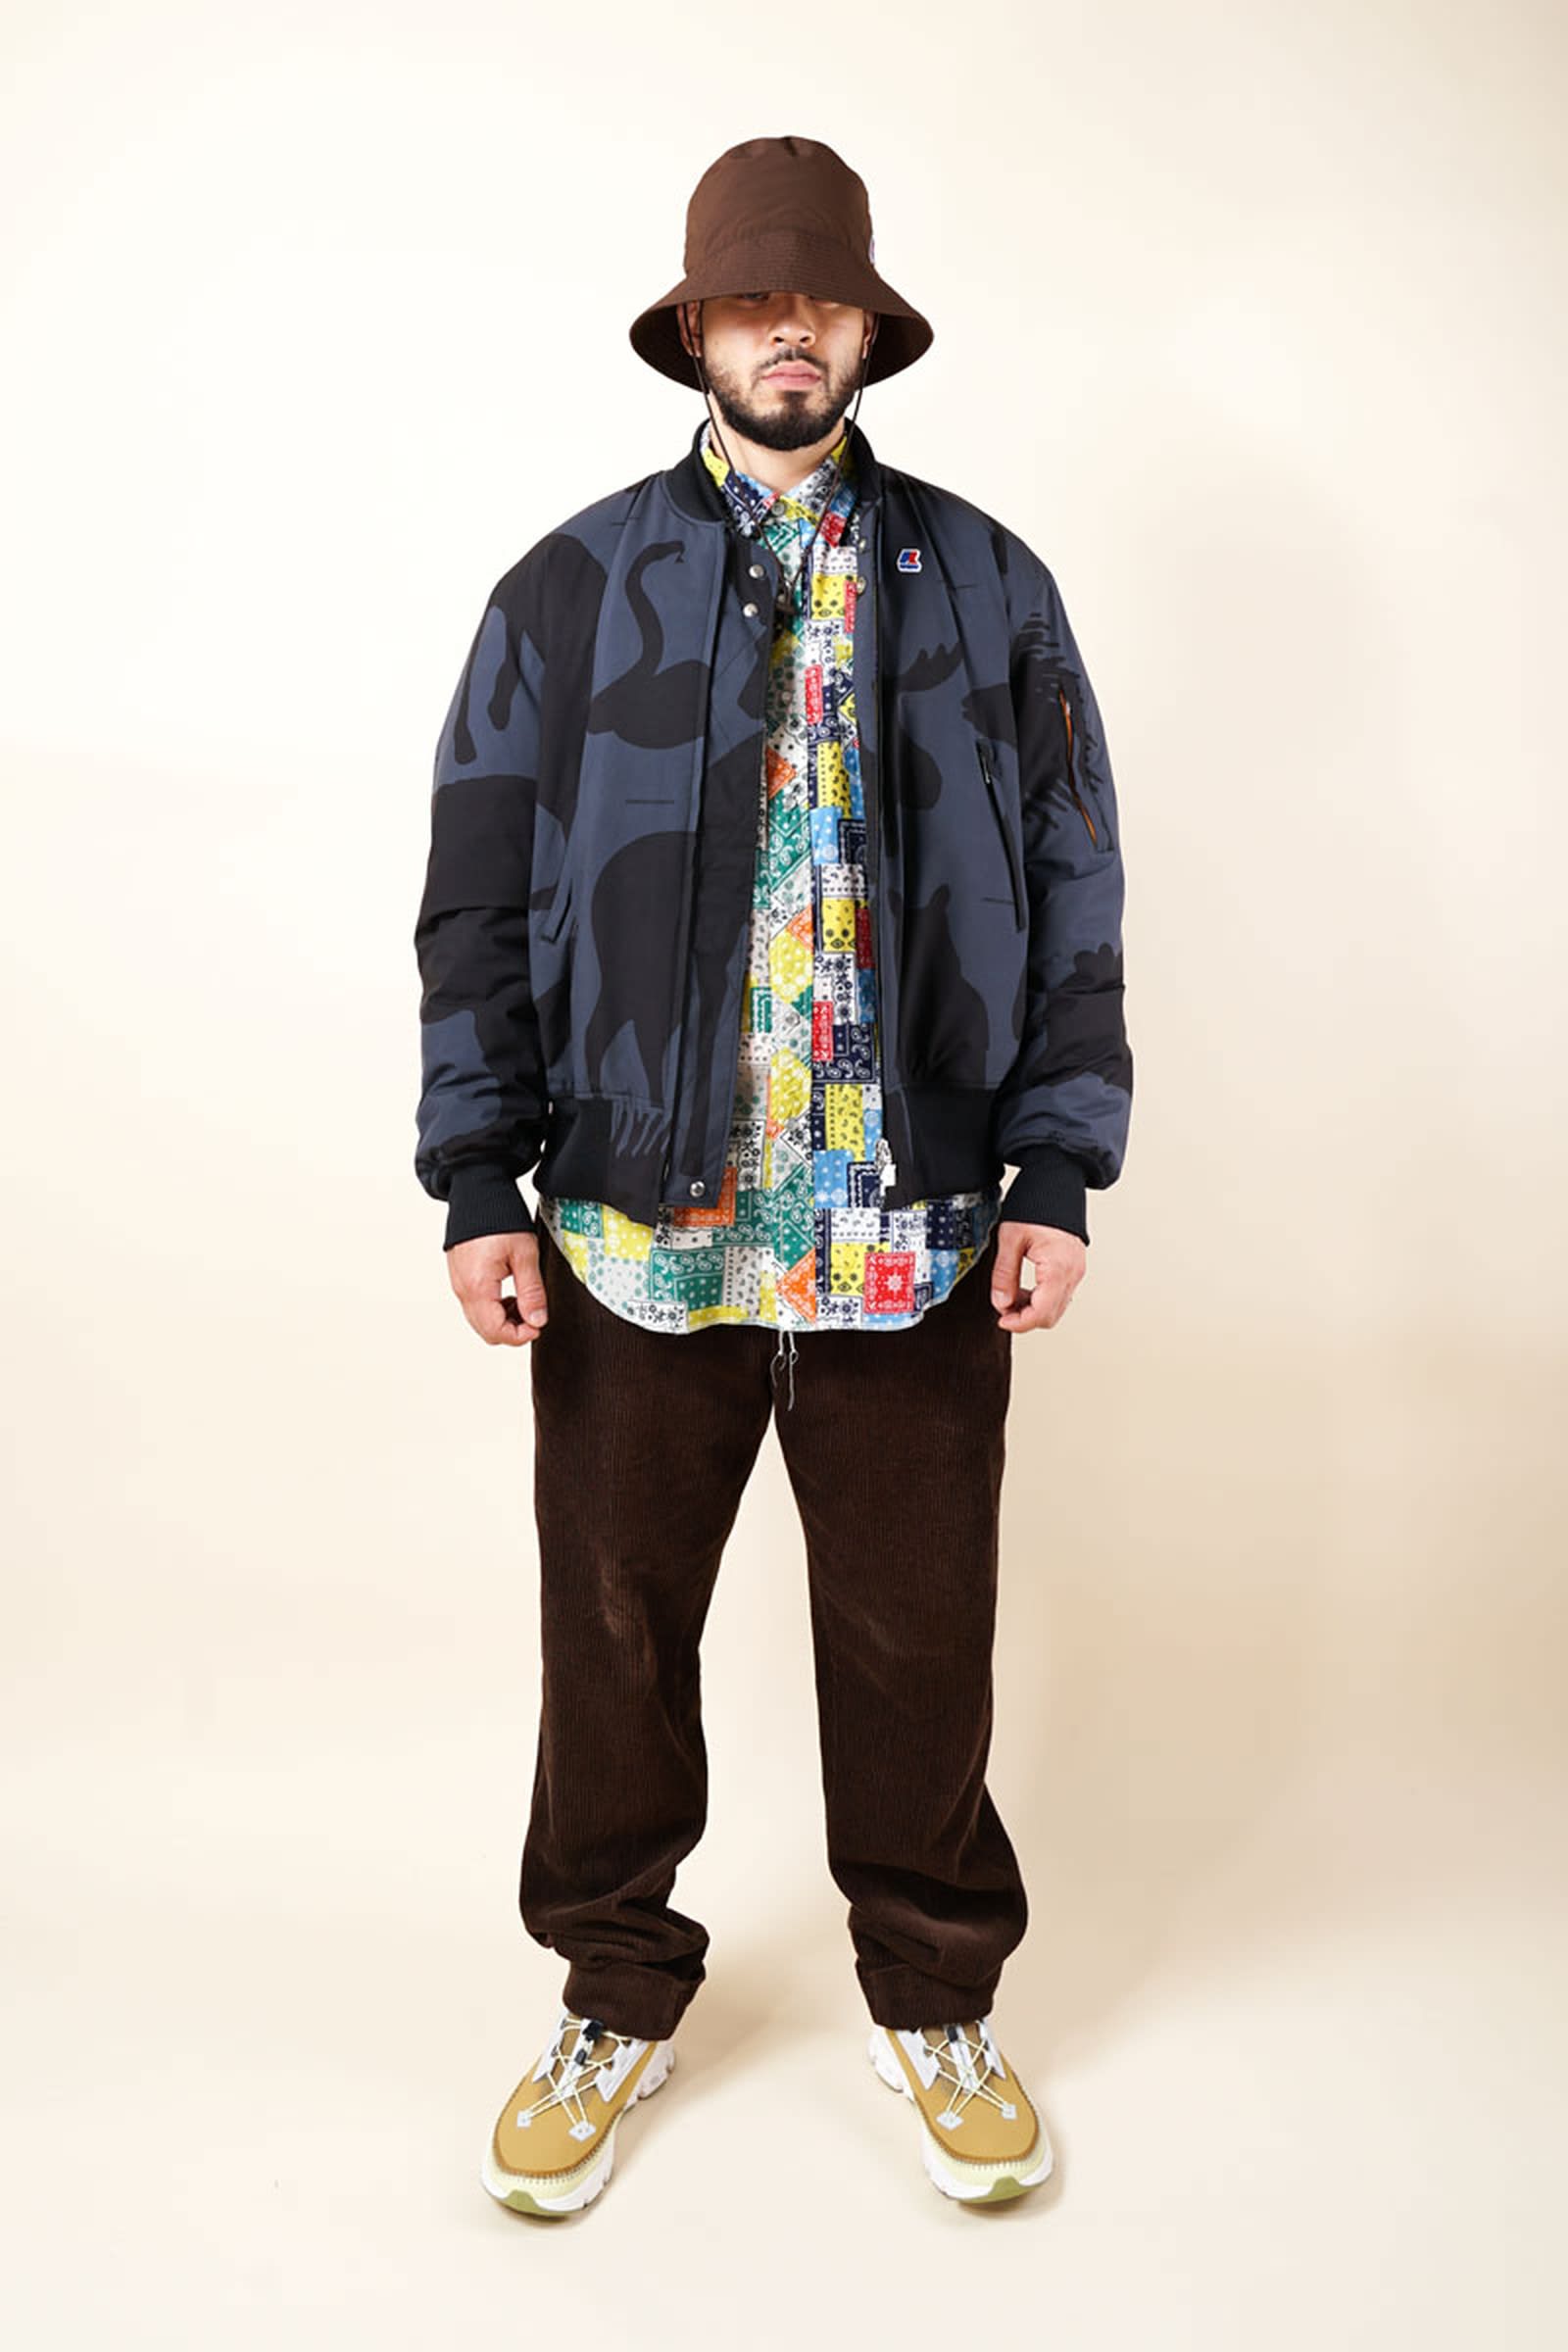 Engineered Garments x K-Way Link Up For 4-Piece Capsule | Complex